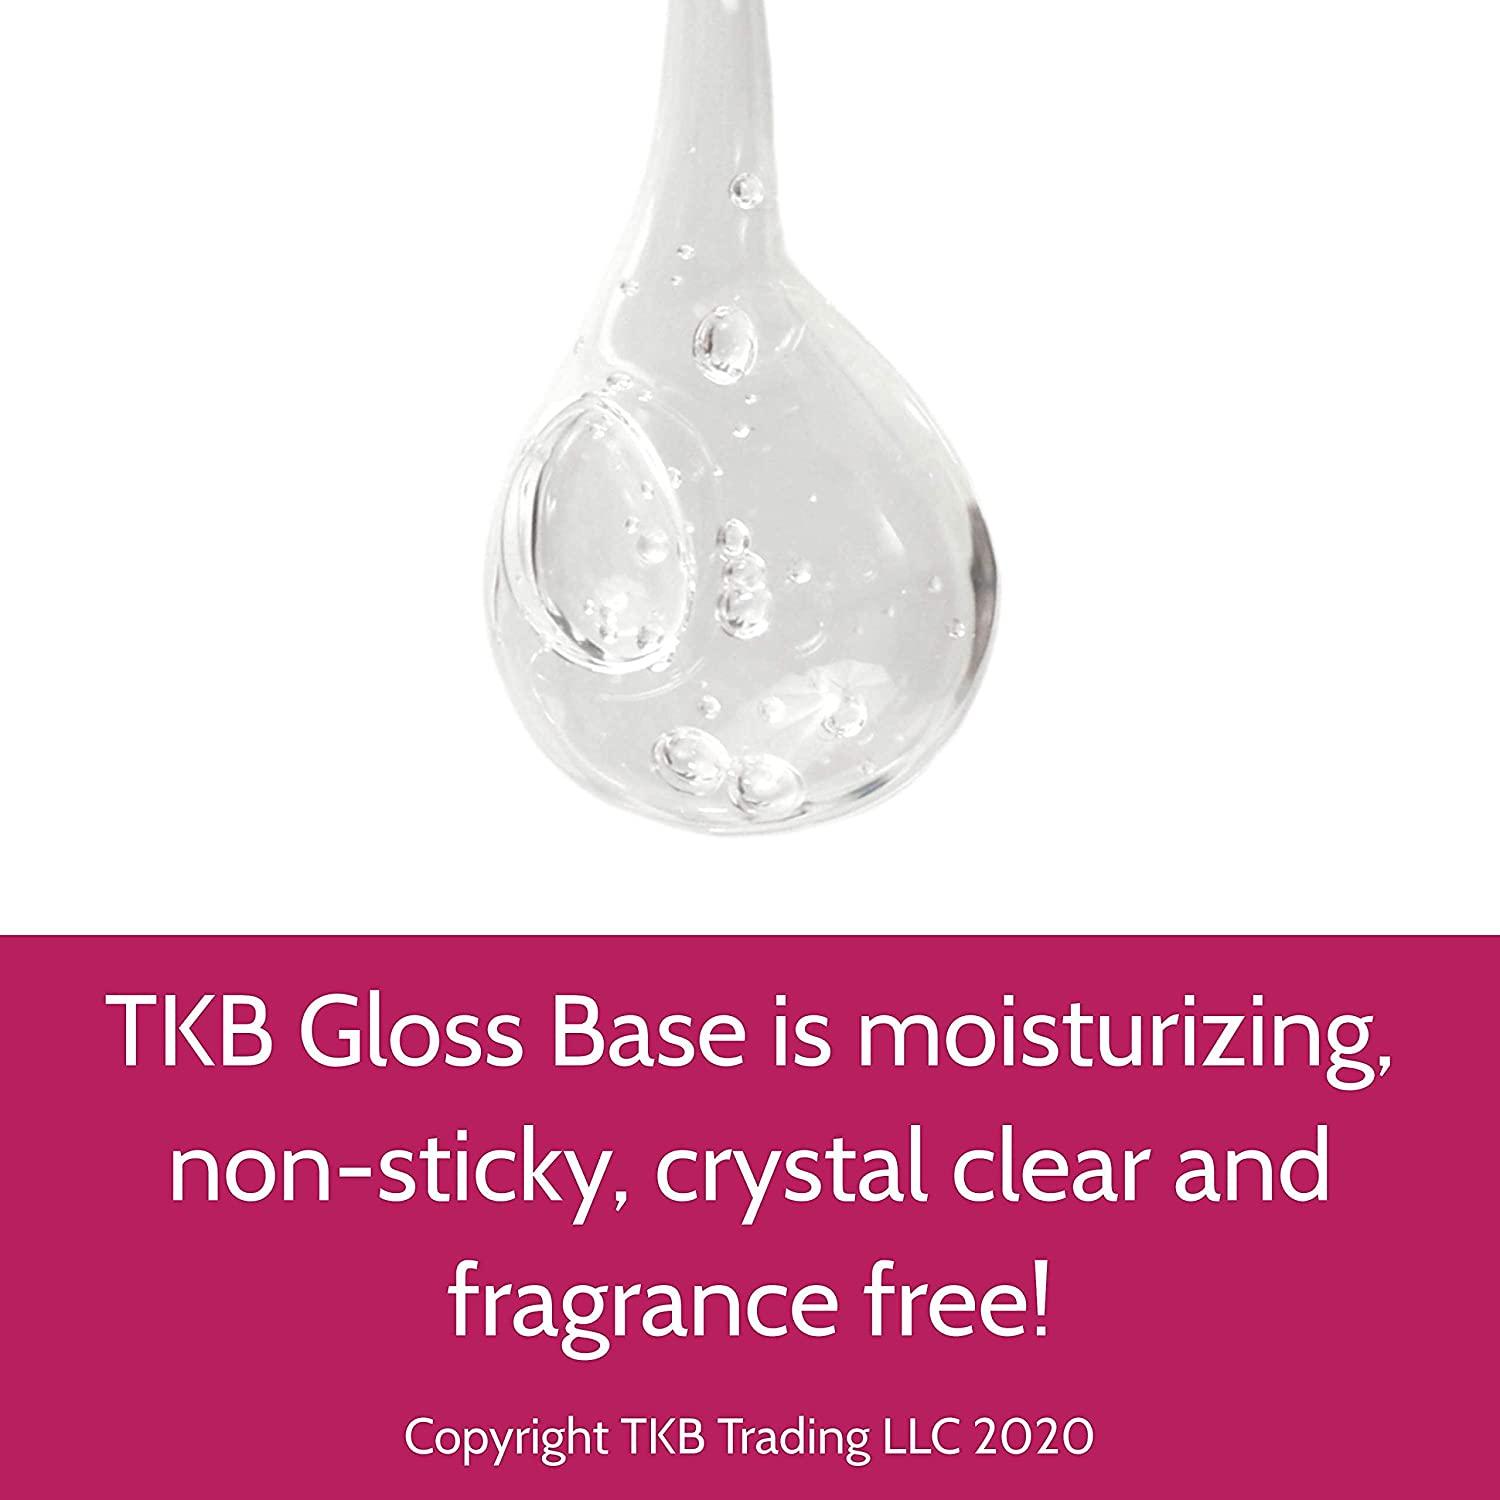  TKB Lip Gloss Base  Clear Versagel Base for DIY Lip Gloss,  Made in USA Mineral-Oil-Free (15 oz) ($1.36/oz) : Beauty & Personal Care